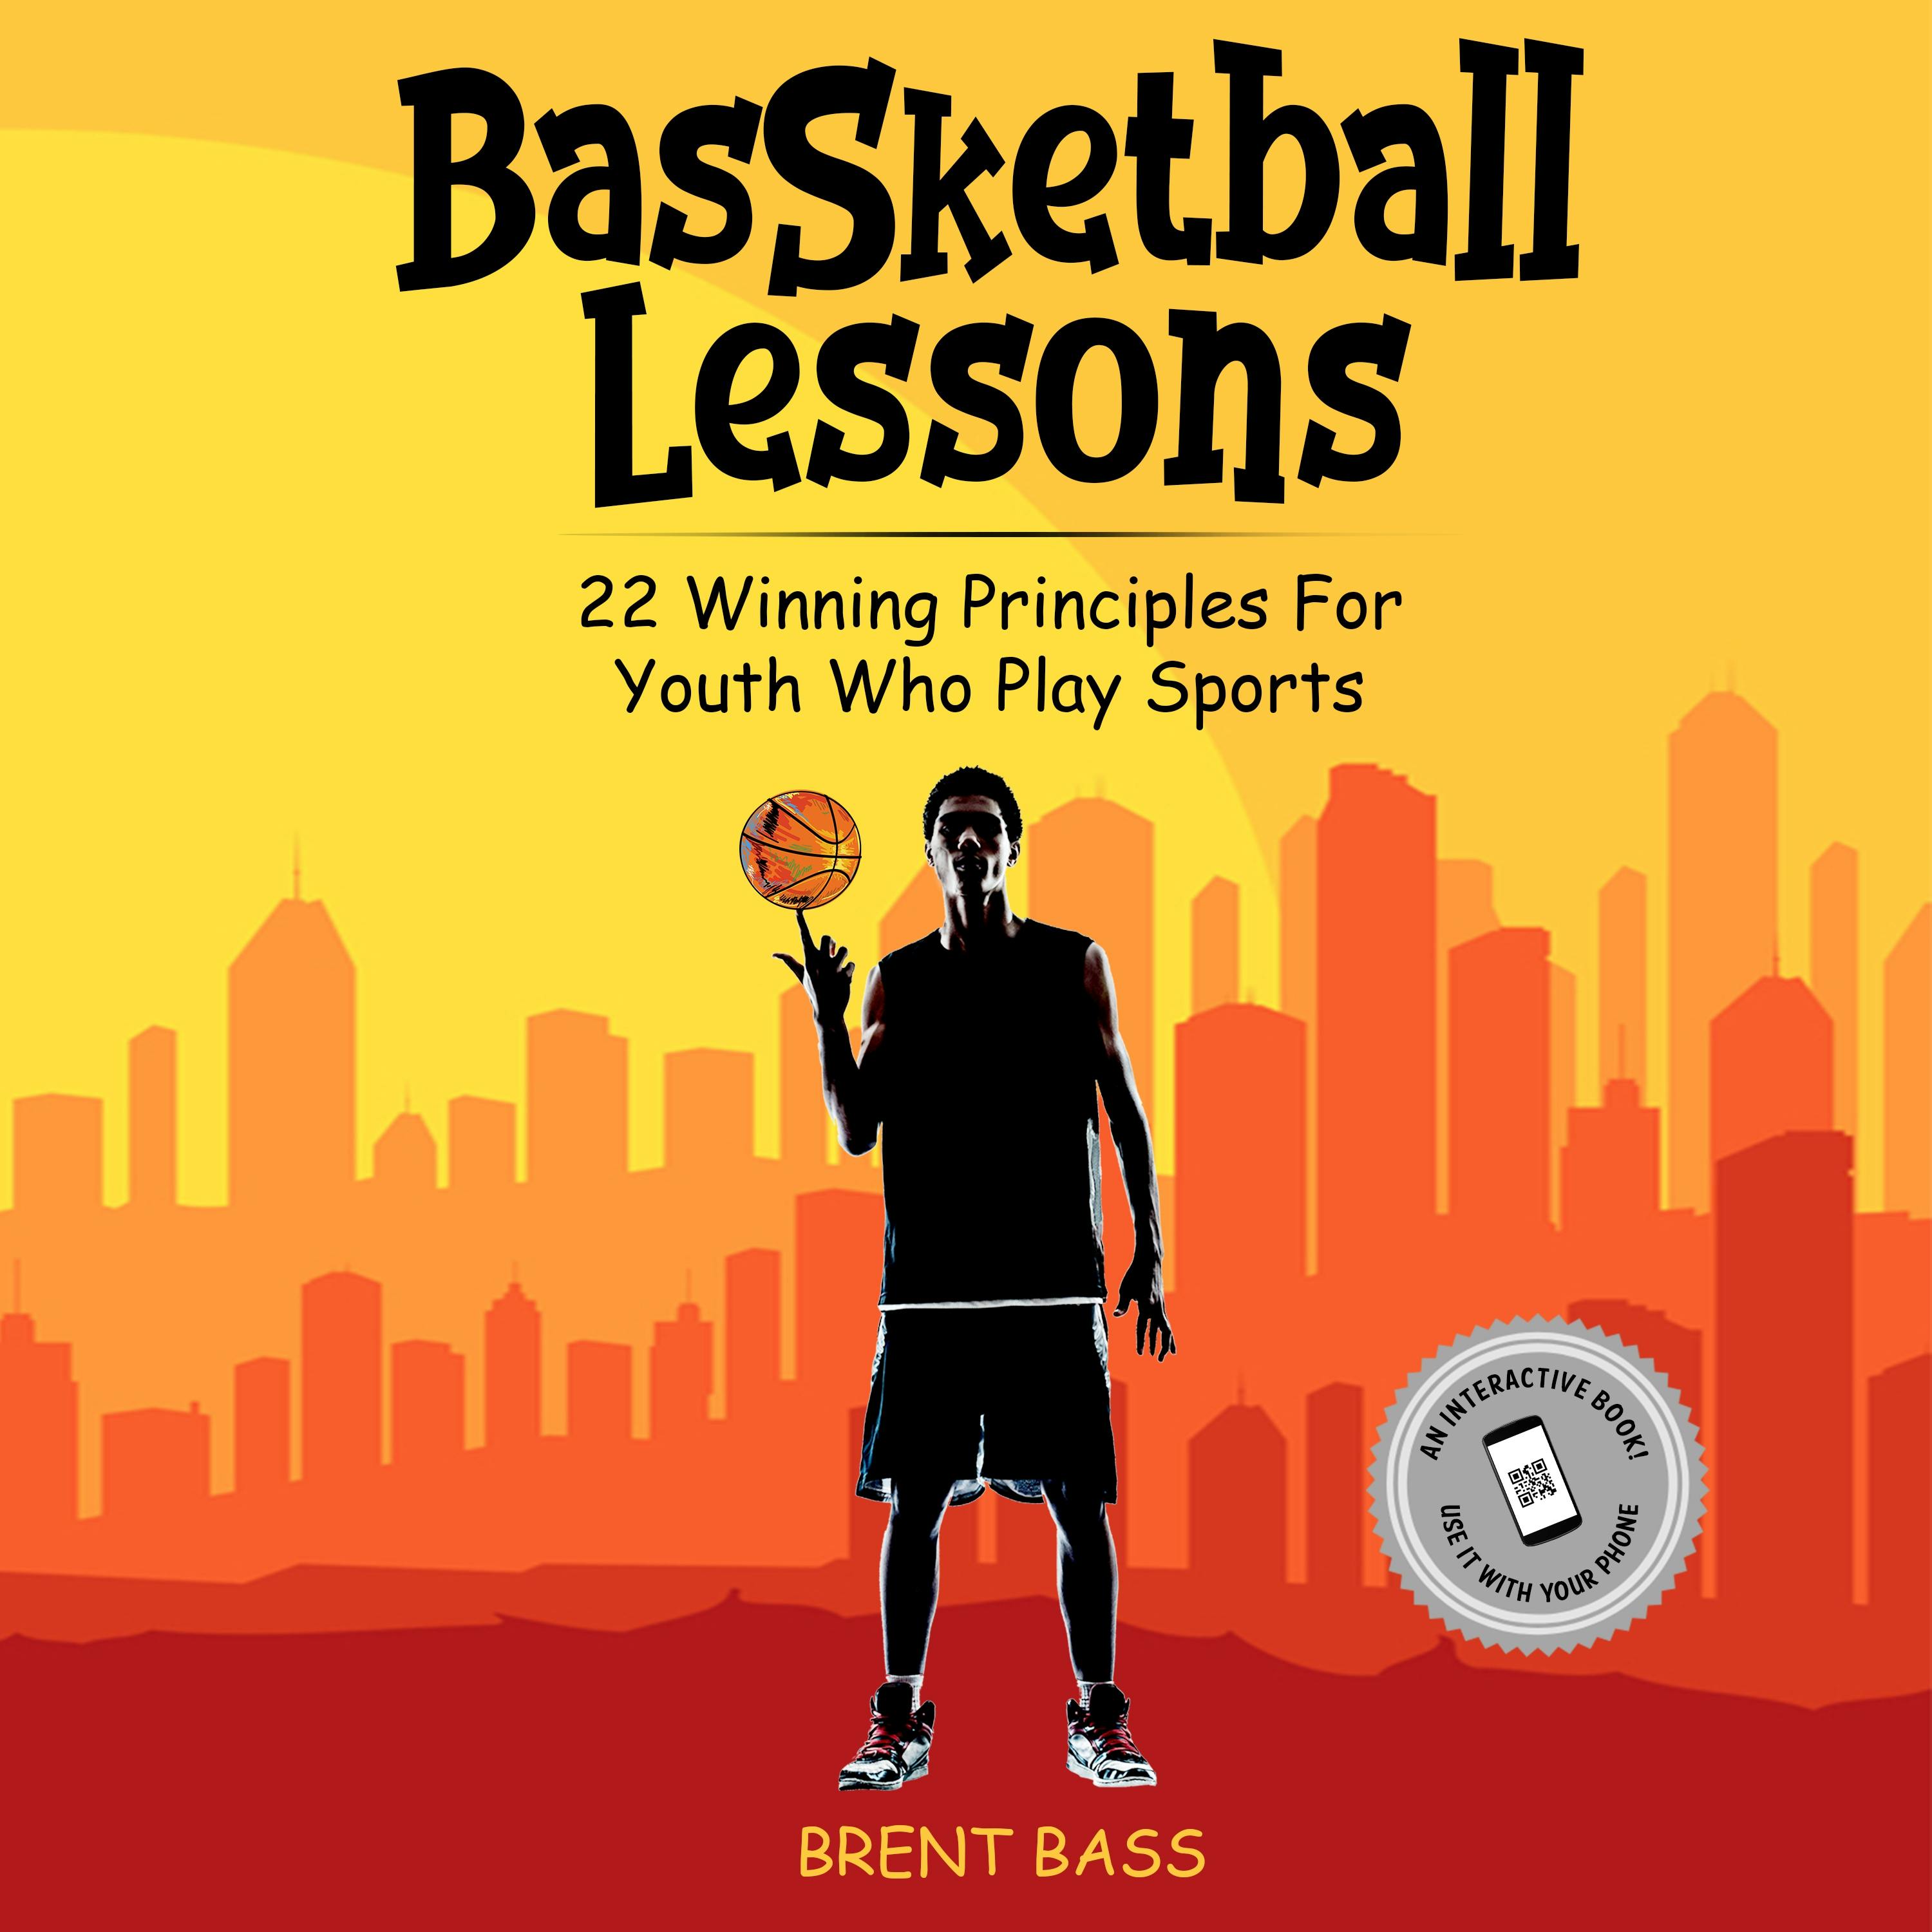 BasSketball Lessons: 22 Winning Principles For Youth Who Play Sports - Brent Bass